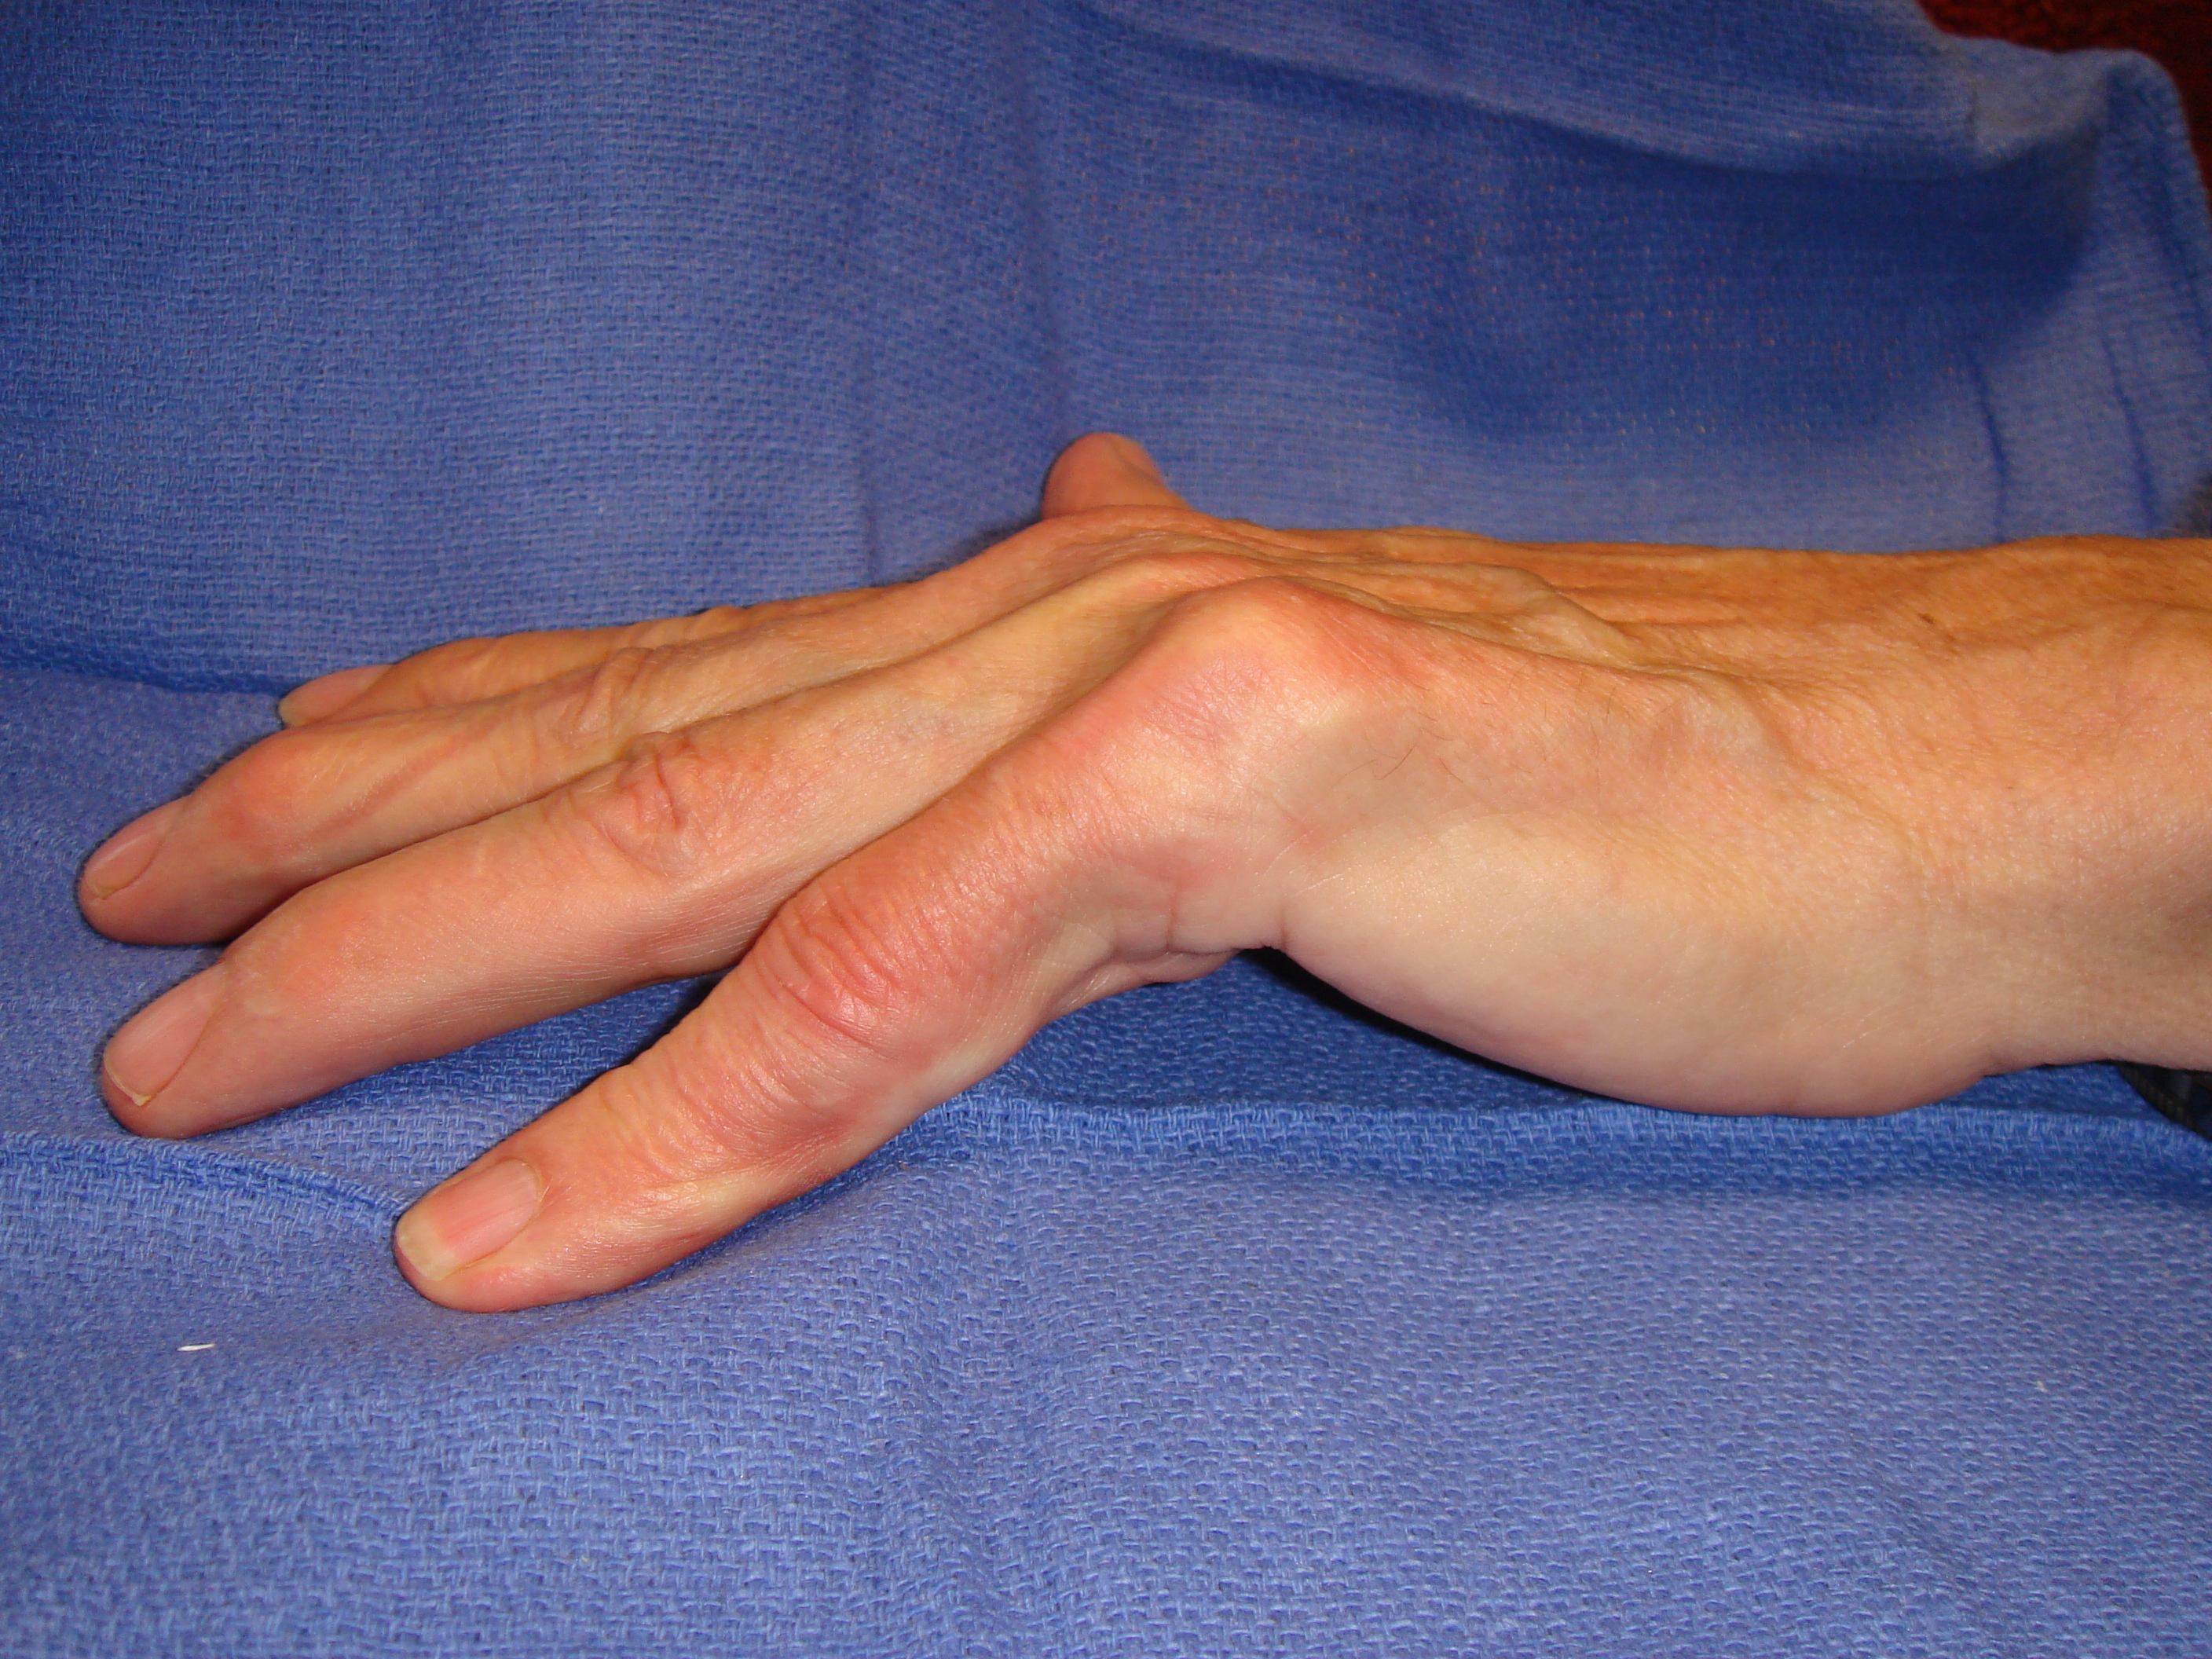 Image 4b: This ~70-year-old male had no family history of Dupuytren’s. There is a problematic cord, seen primarily in the fifth ray and that crossed towards the ring finger web.